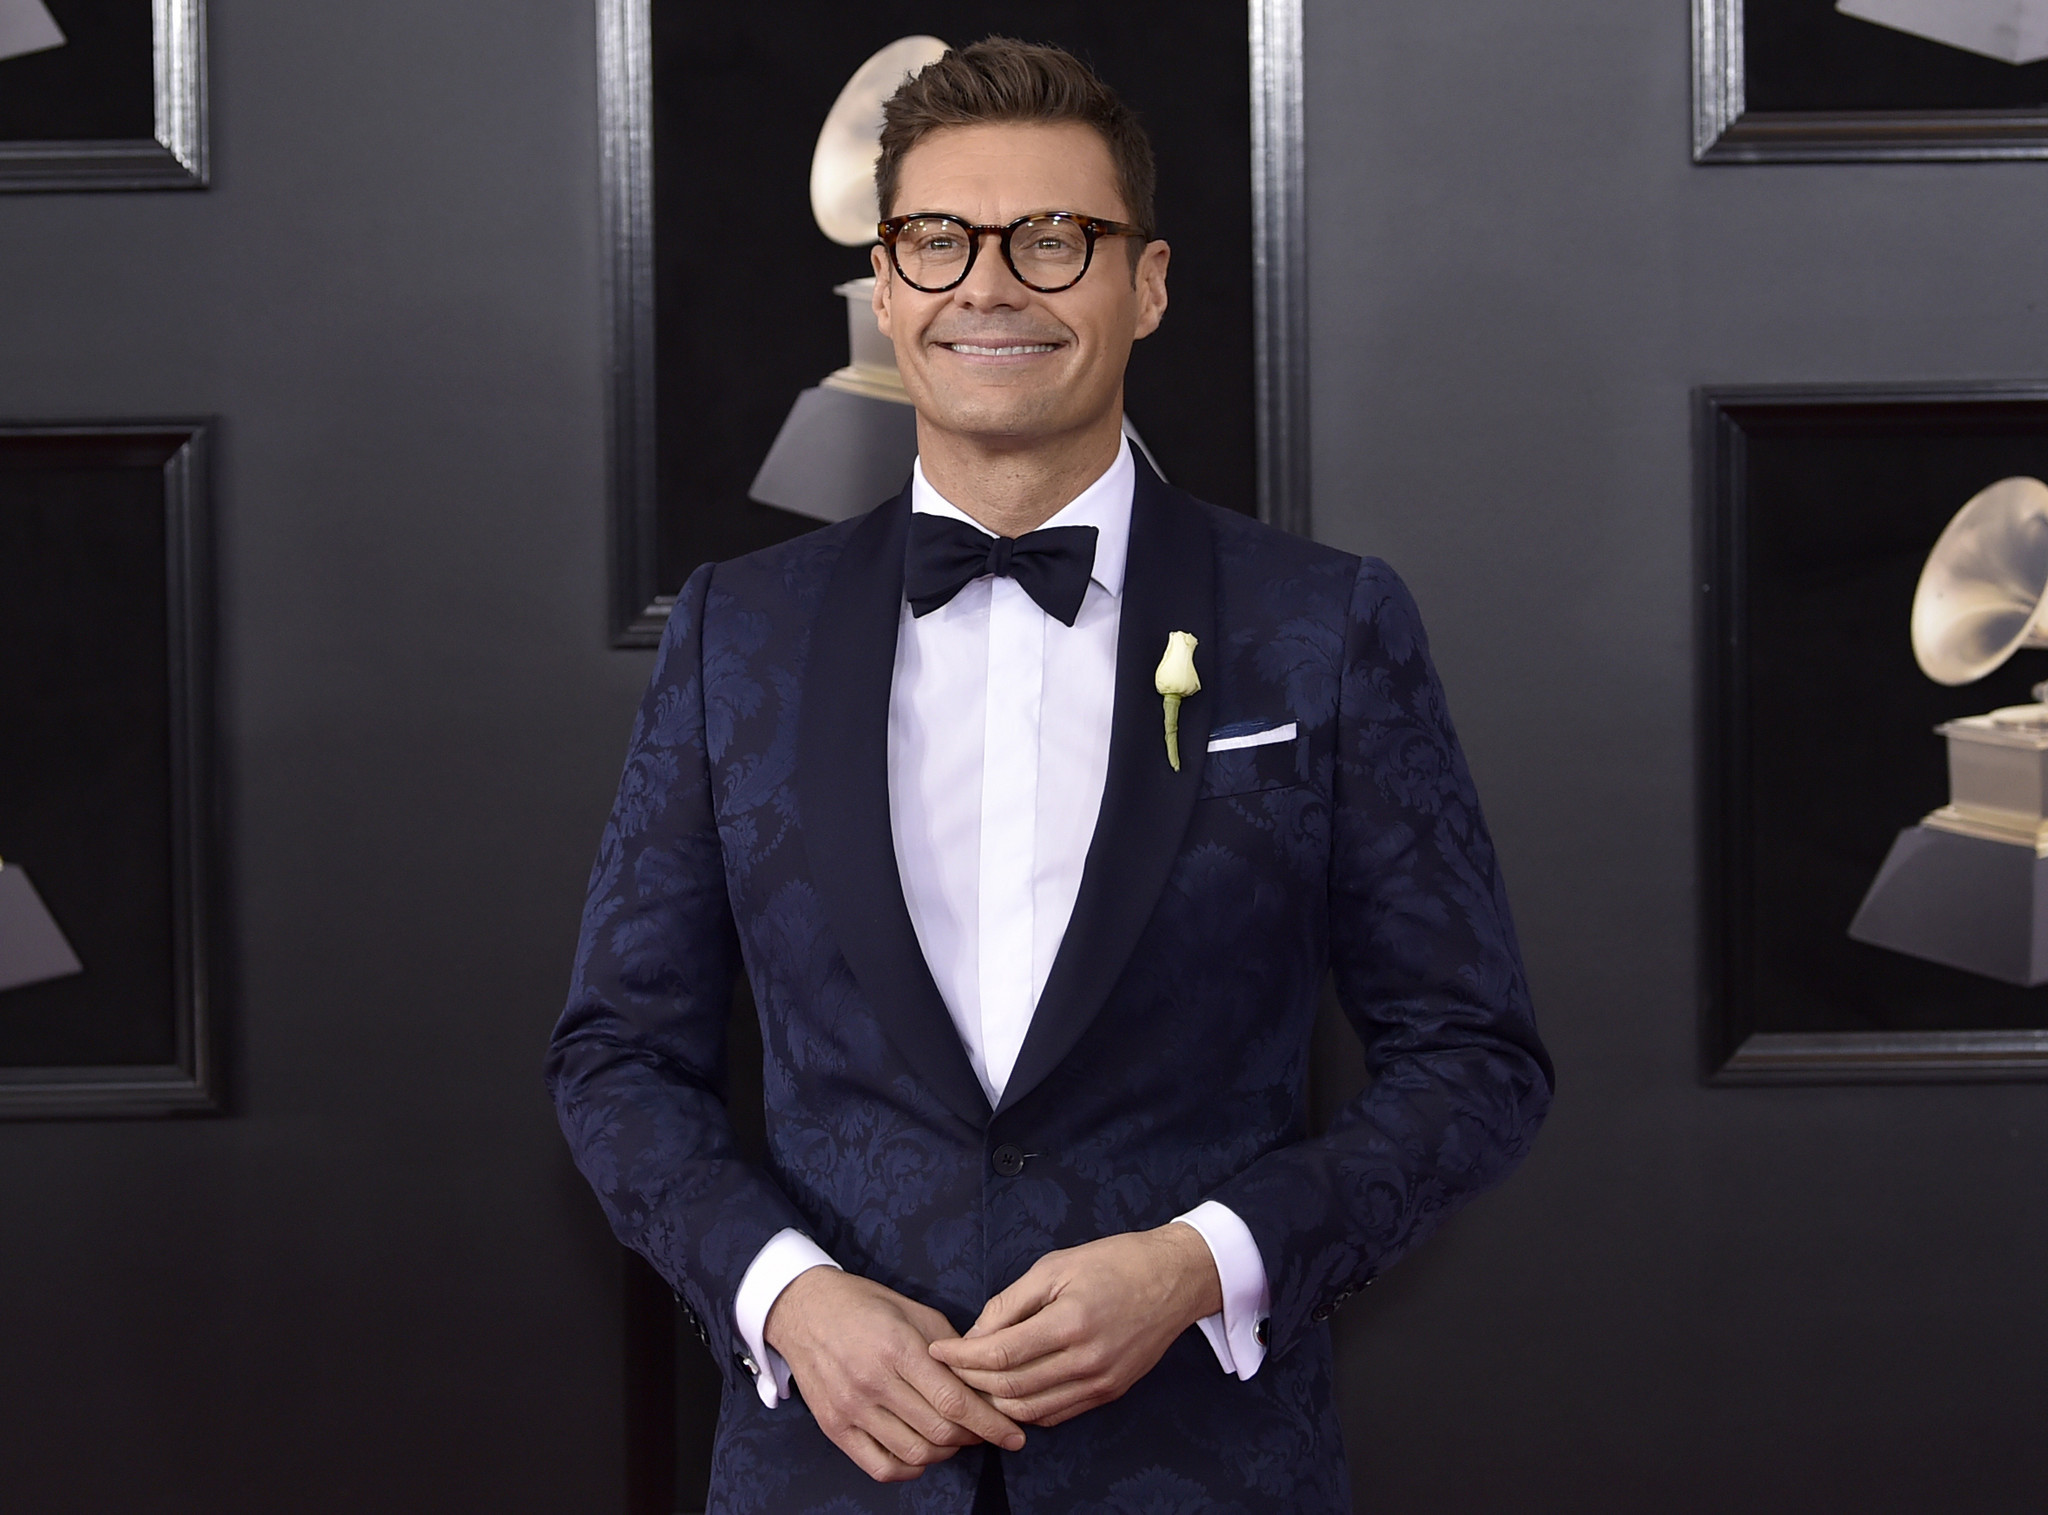 Oscars: Ryan Seacrest avoids #MeToo mentions, lands fewer A-listers on red carpet ...